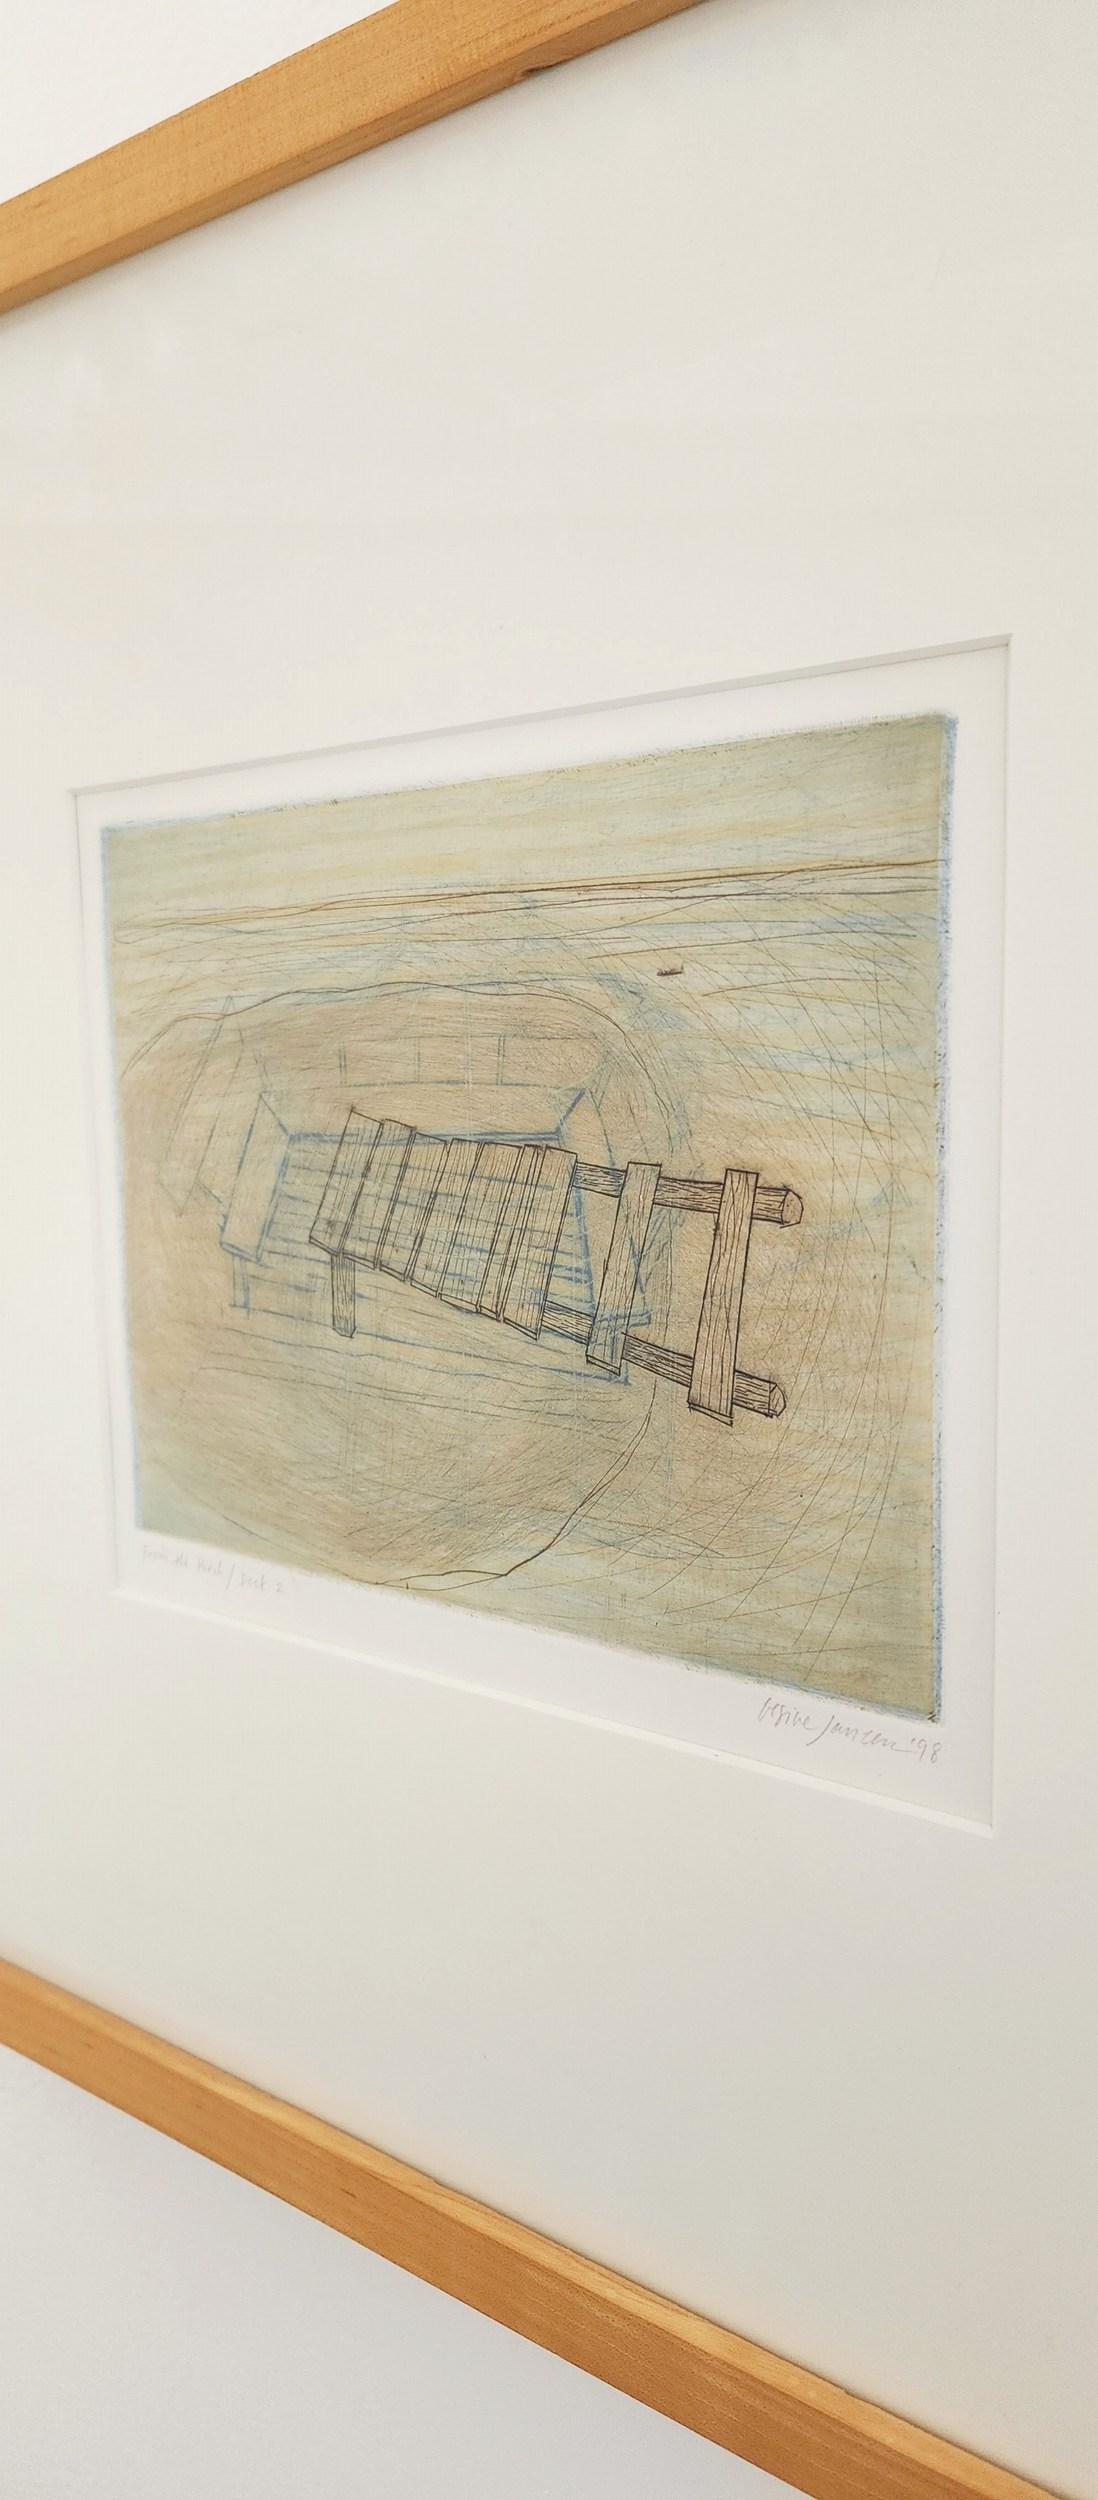 Gesine Janzen
From the Porch / Dock 2
Woodcut
Year: 1998
Size: 6.5 x 8 inches
Framed: 16 x 17 inches - Natural wood, light
Signed, dated and titled by hand
Comes with original papers
COA provided
Ref.: 924802-1023

Janzen is Associate Professor of